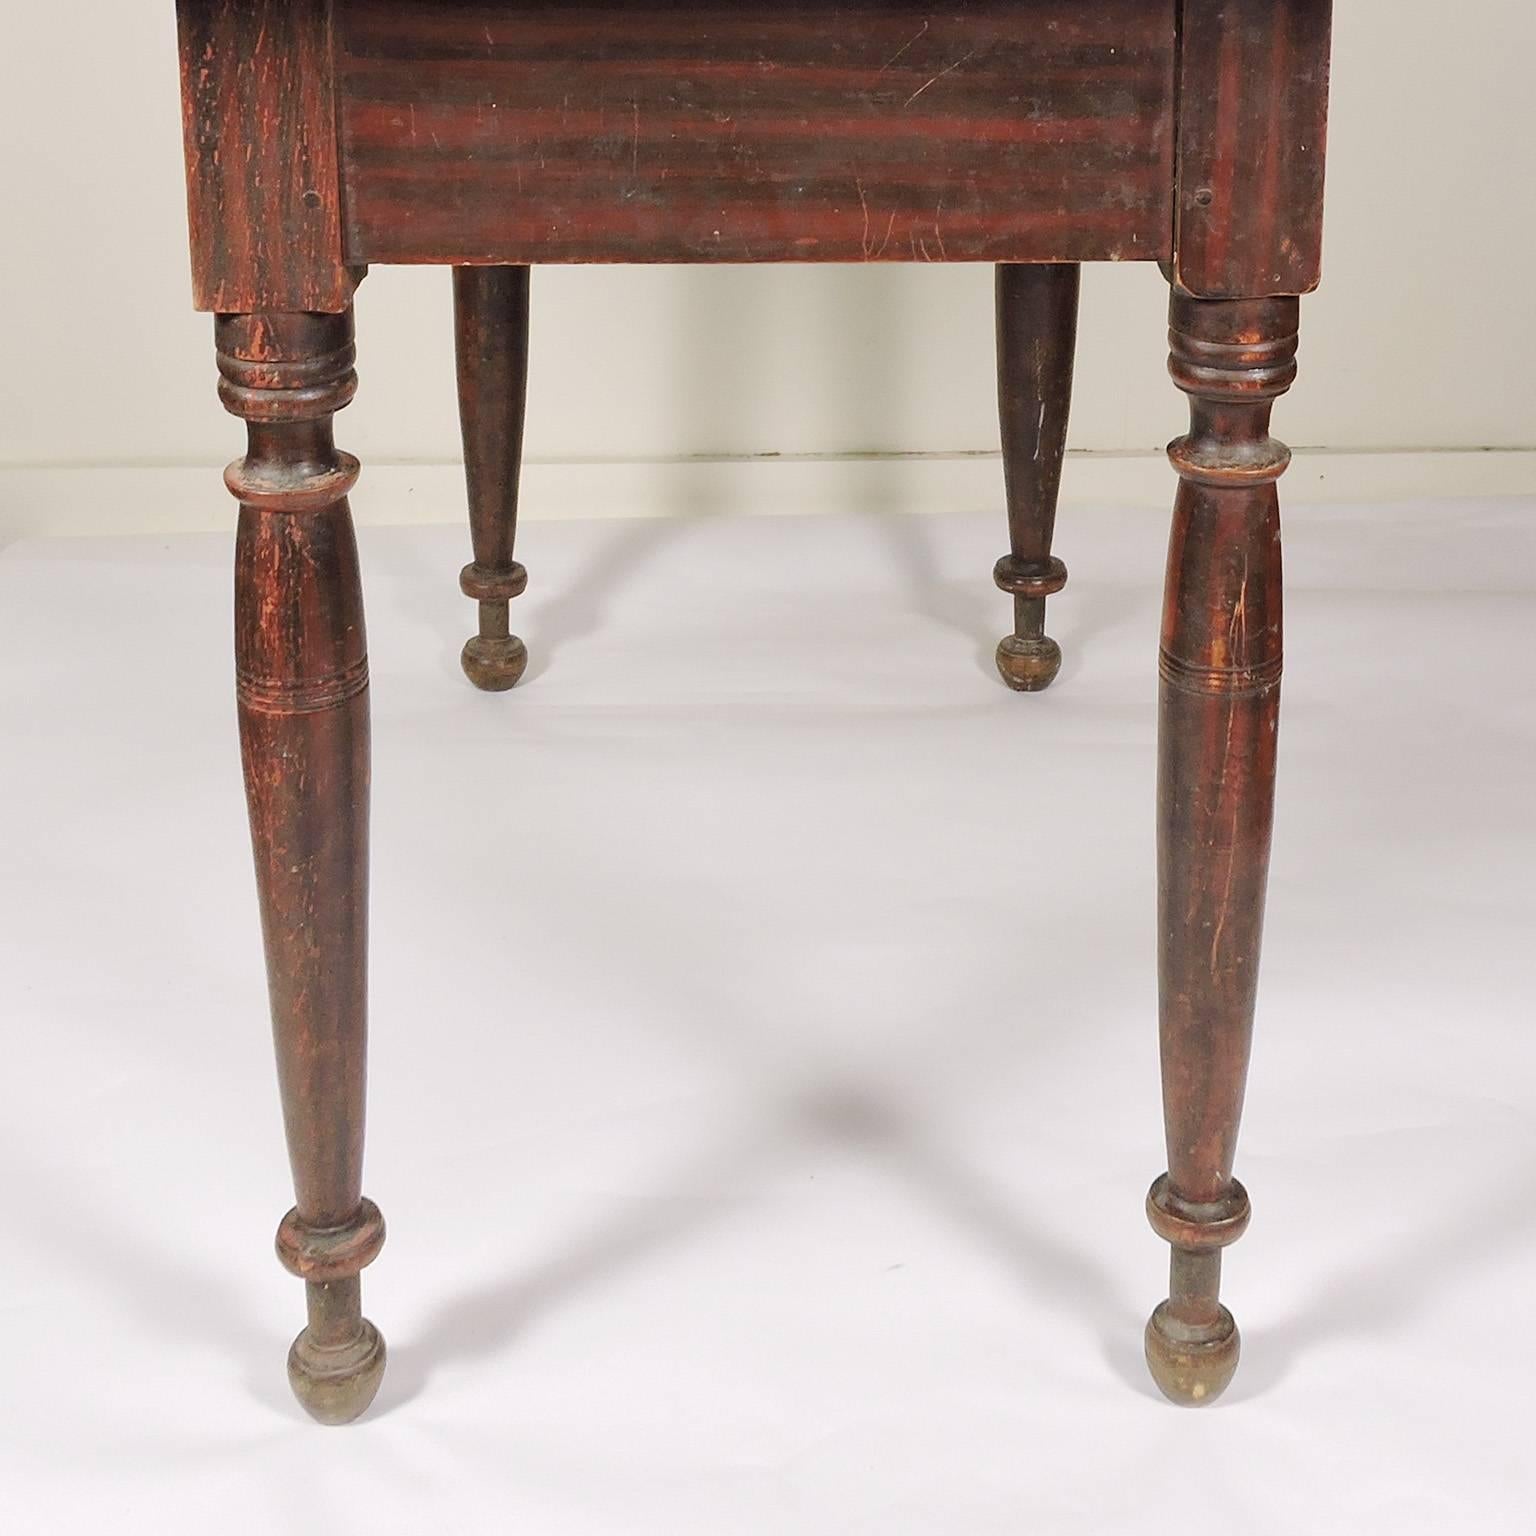 Great 19th Century Country American Grain Painted Drop-Leaf Table In Good Condition For Sale In Concord, MA